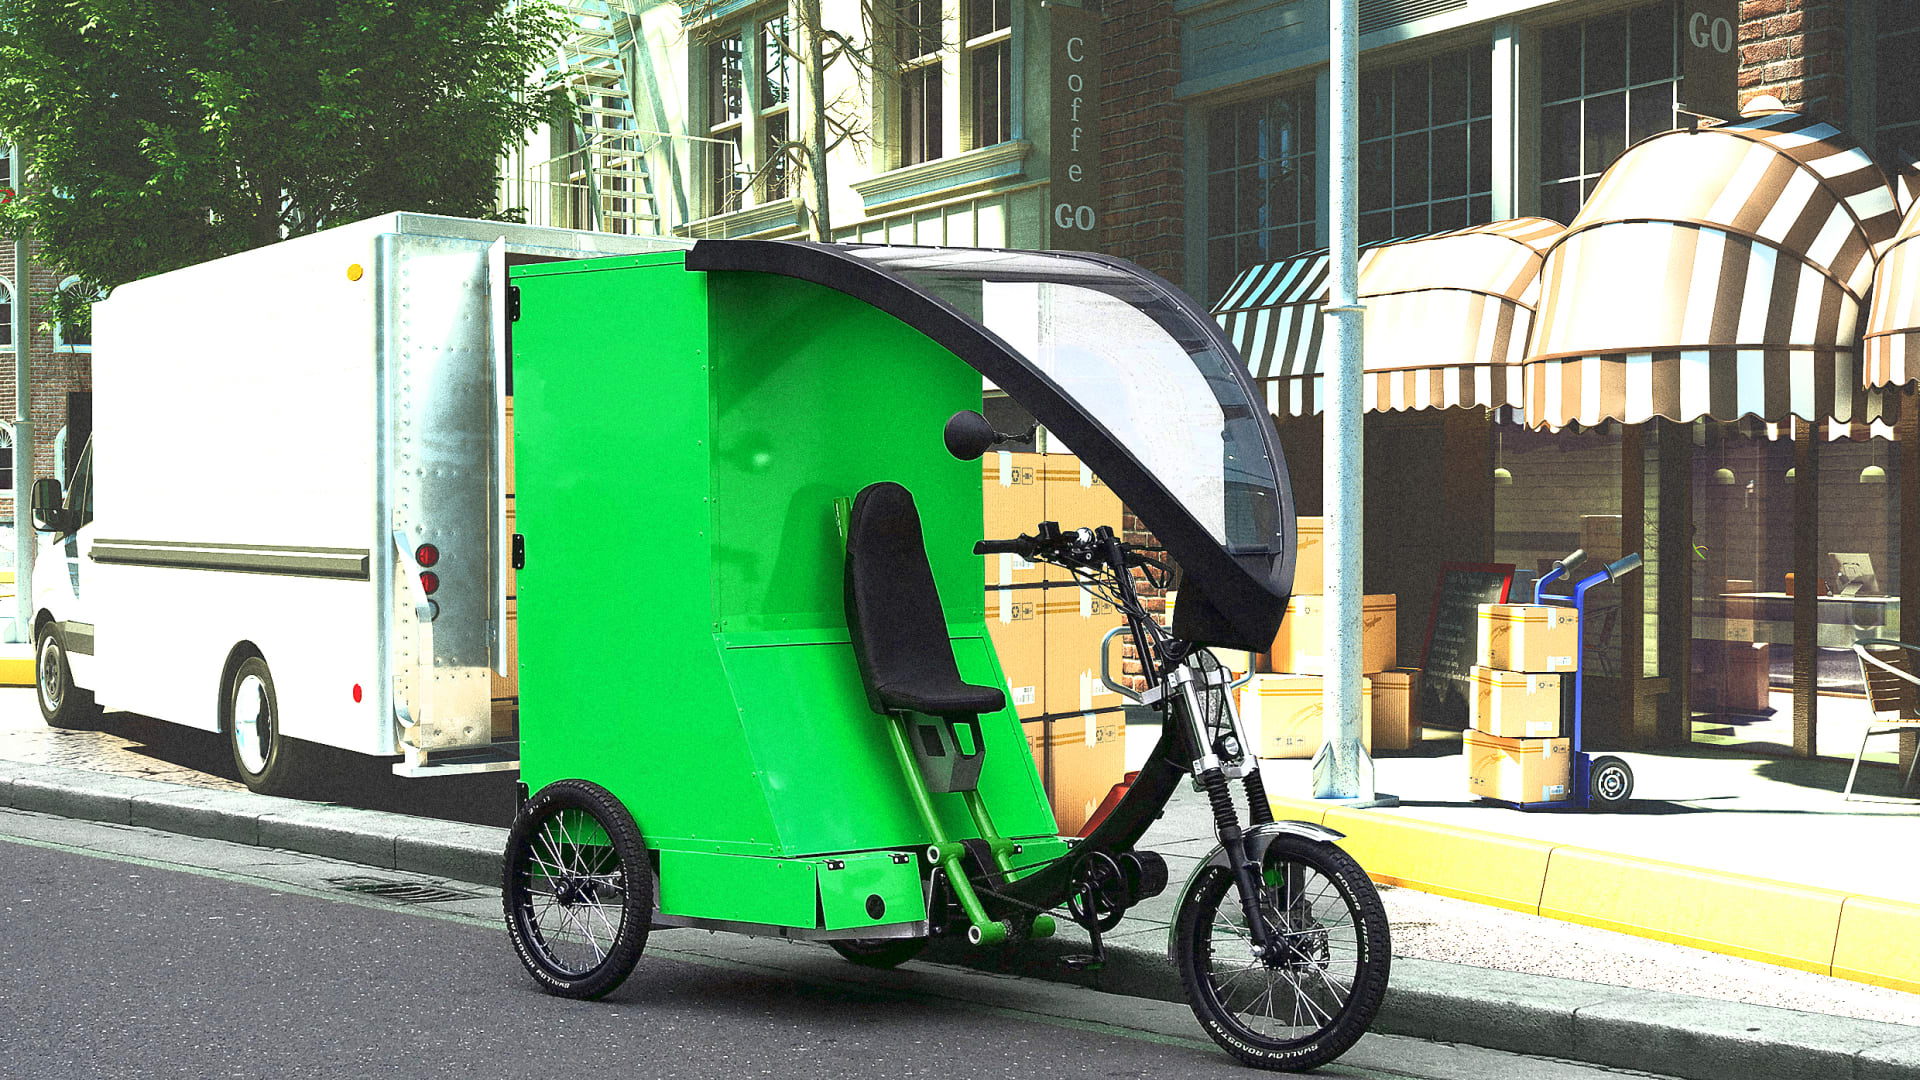 Cargo bikes can deliver packages faster than vans—and with less pollution